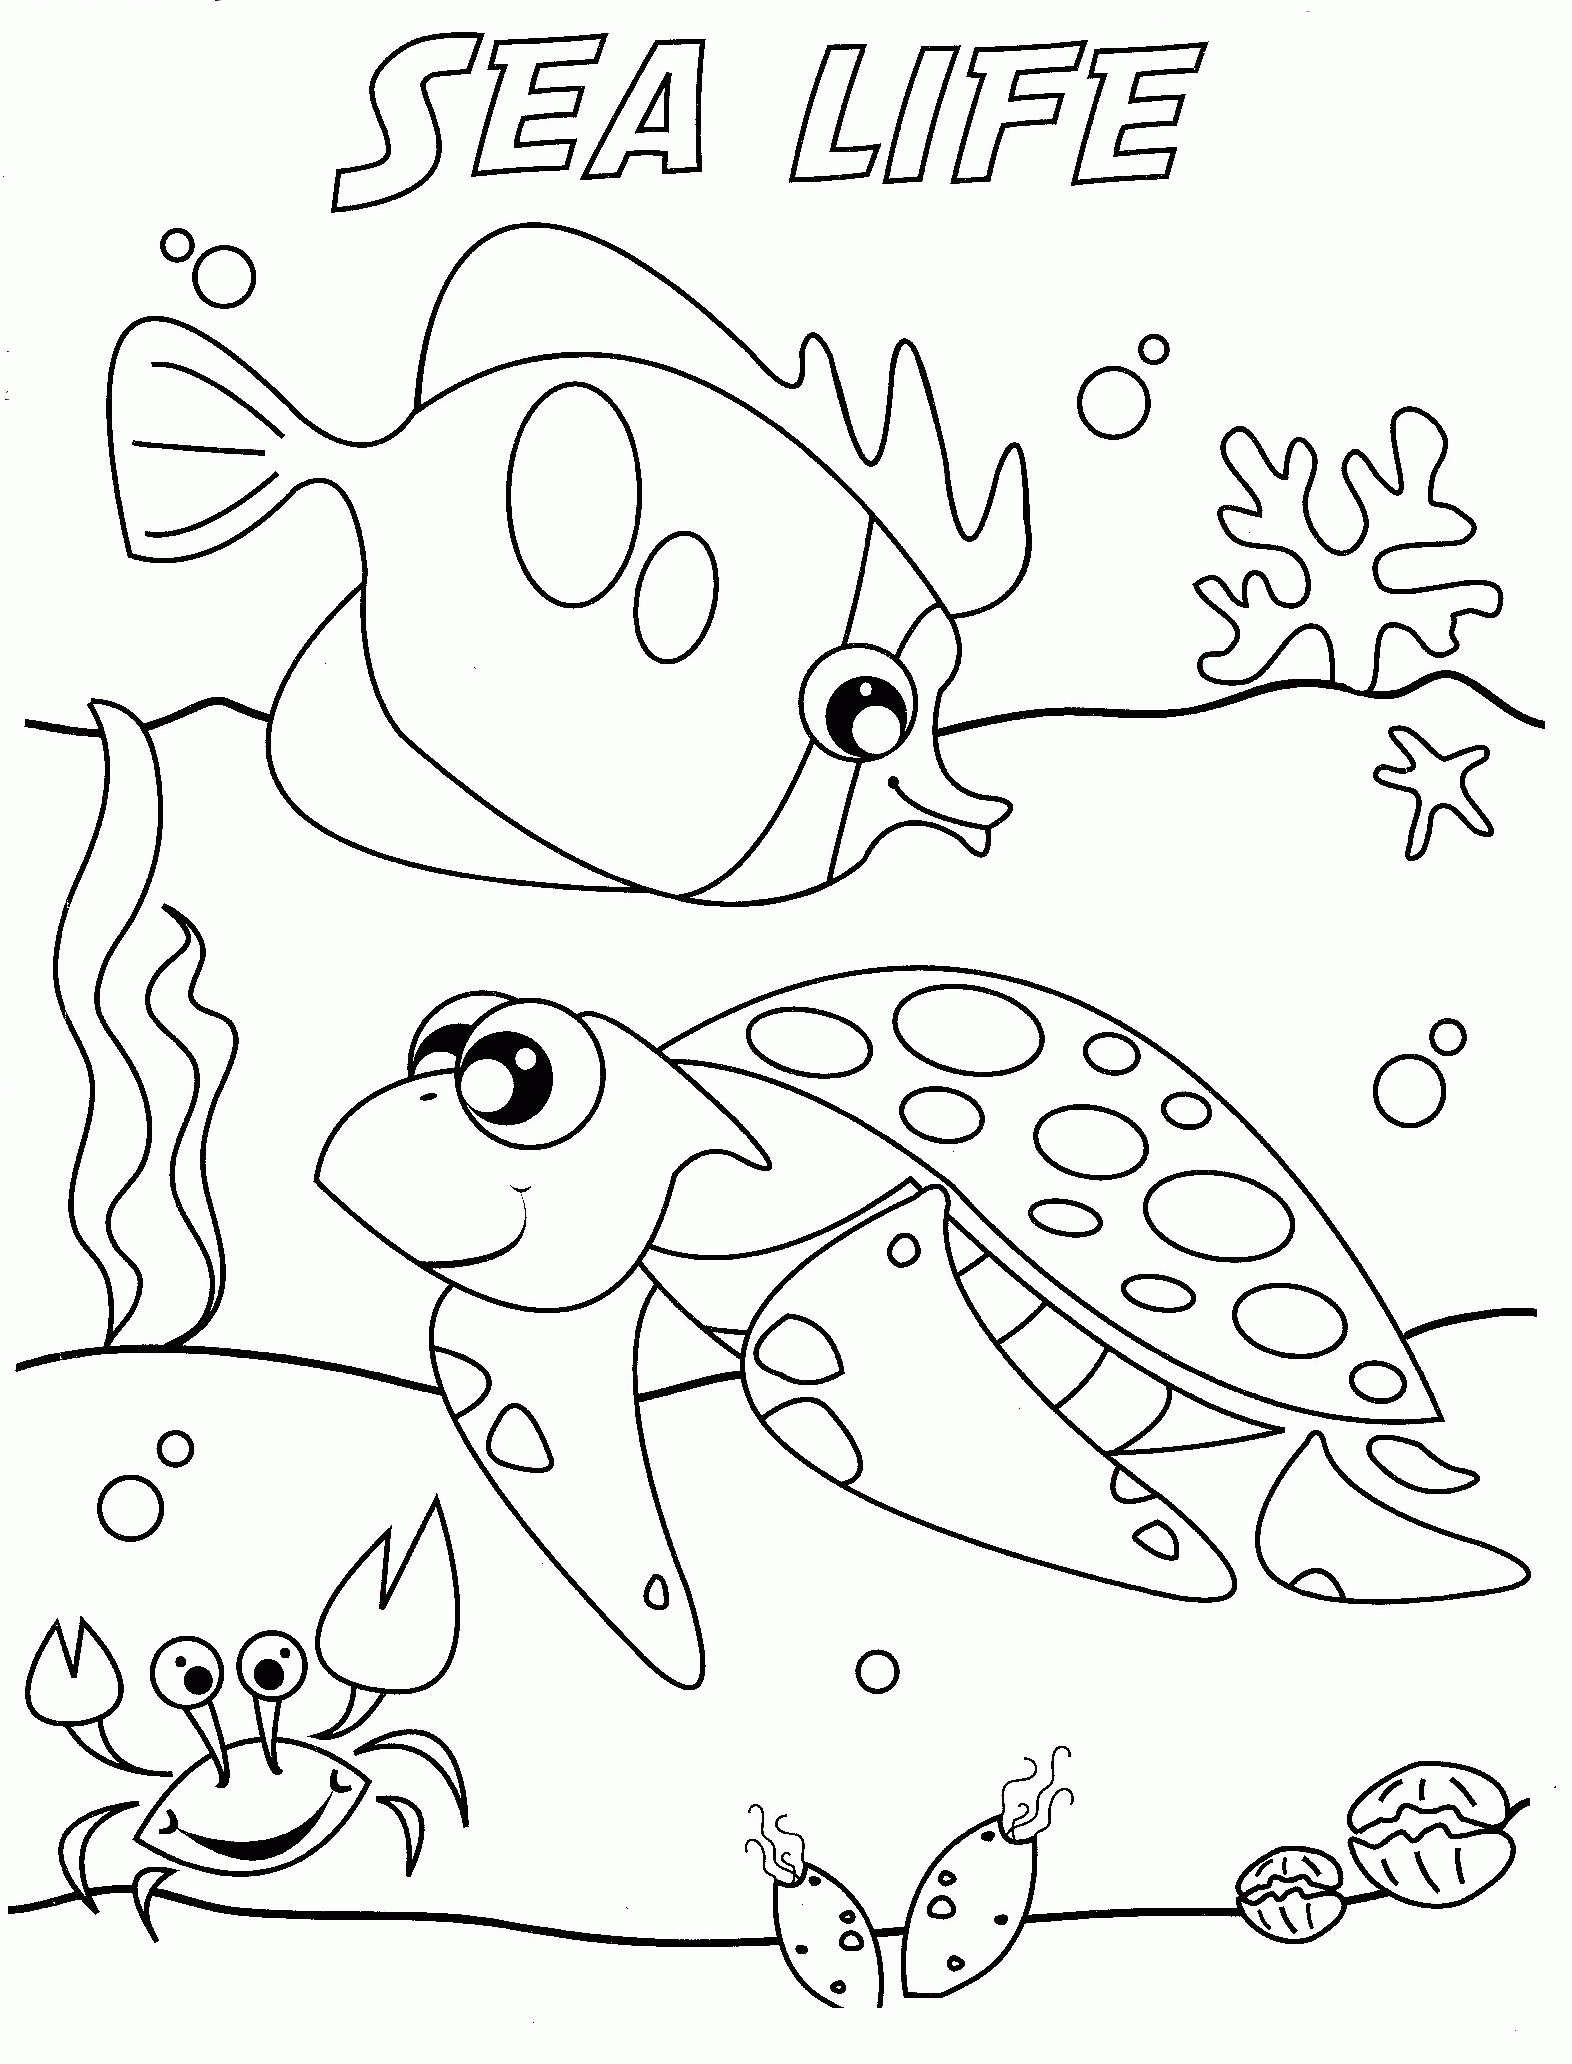 Marine life coloring pages | www.veupropia.org